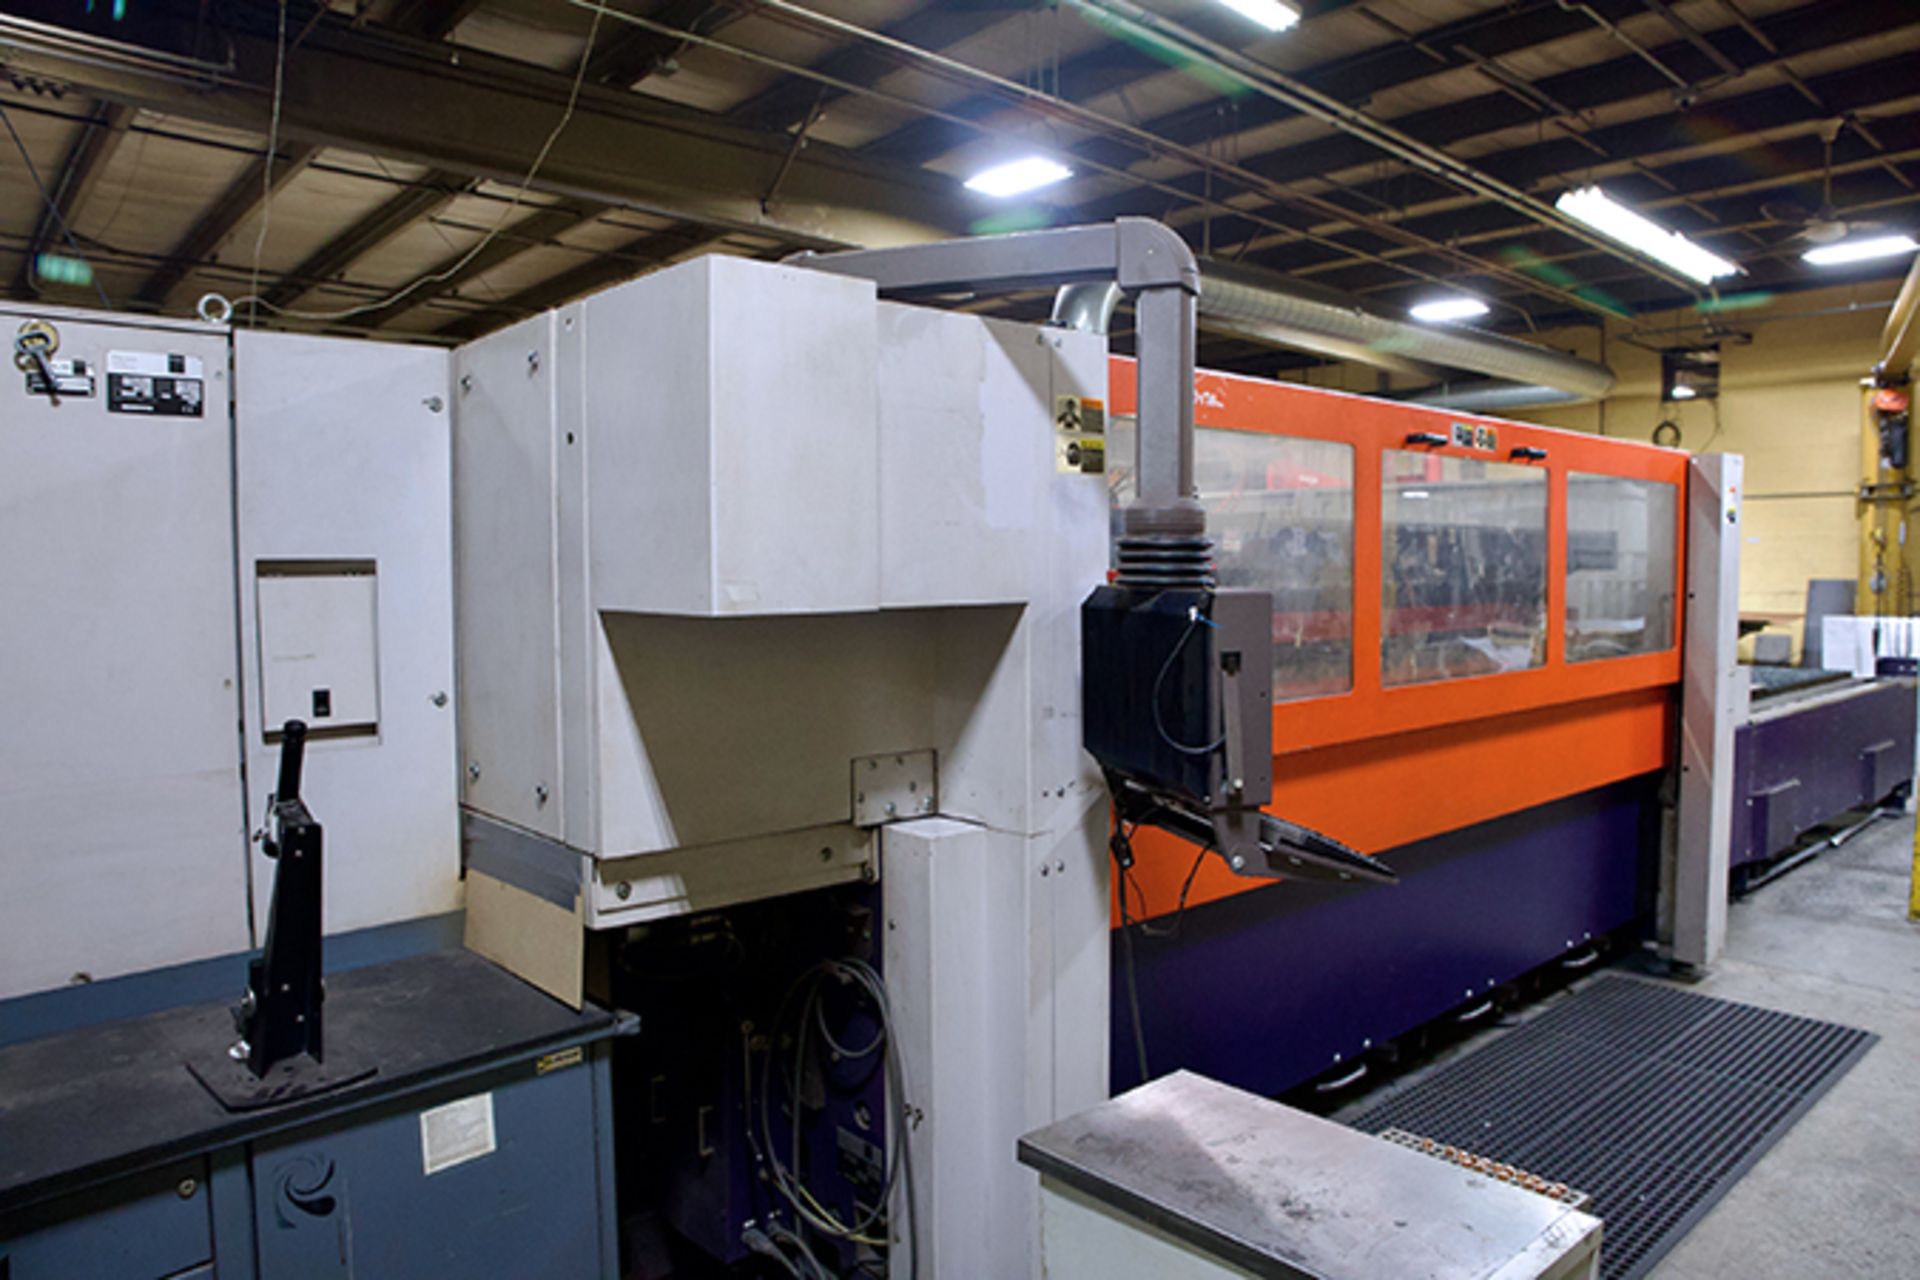 Bystronic Bystar 3015 Laser Cutting Machine (2007) - Image 12 of 13